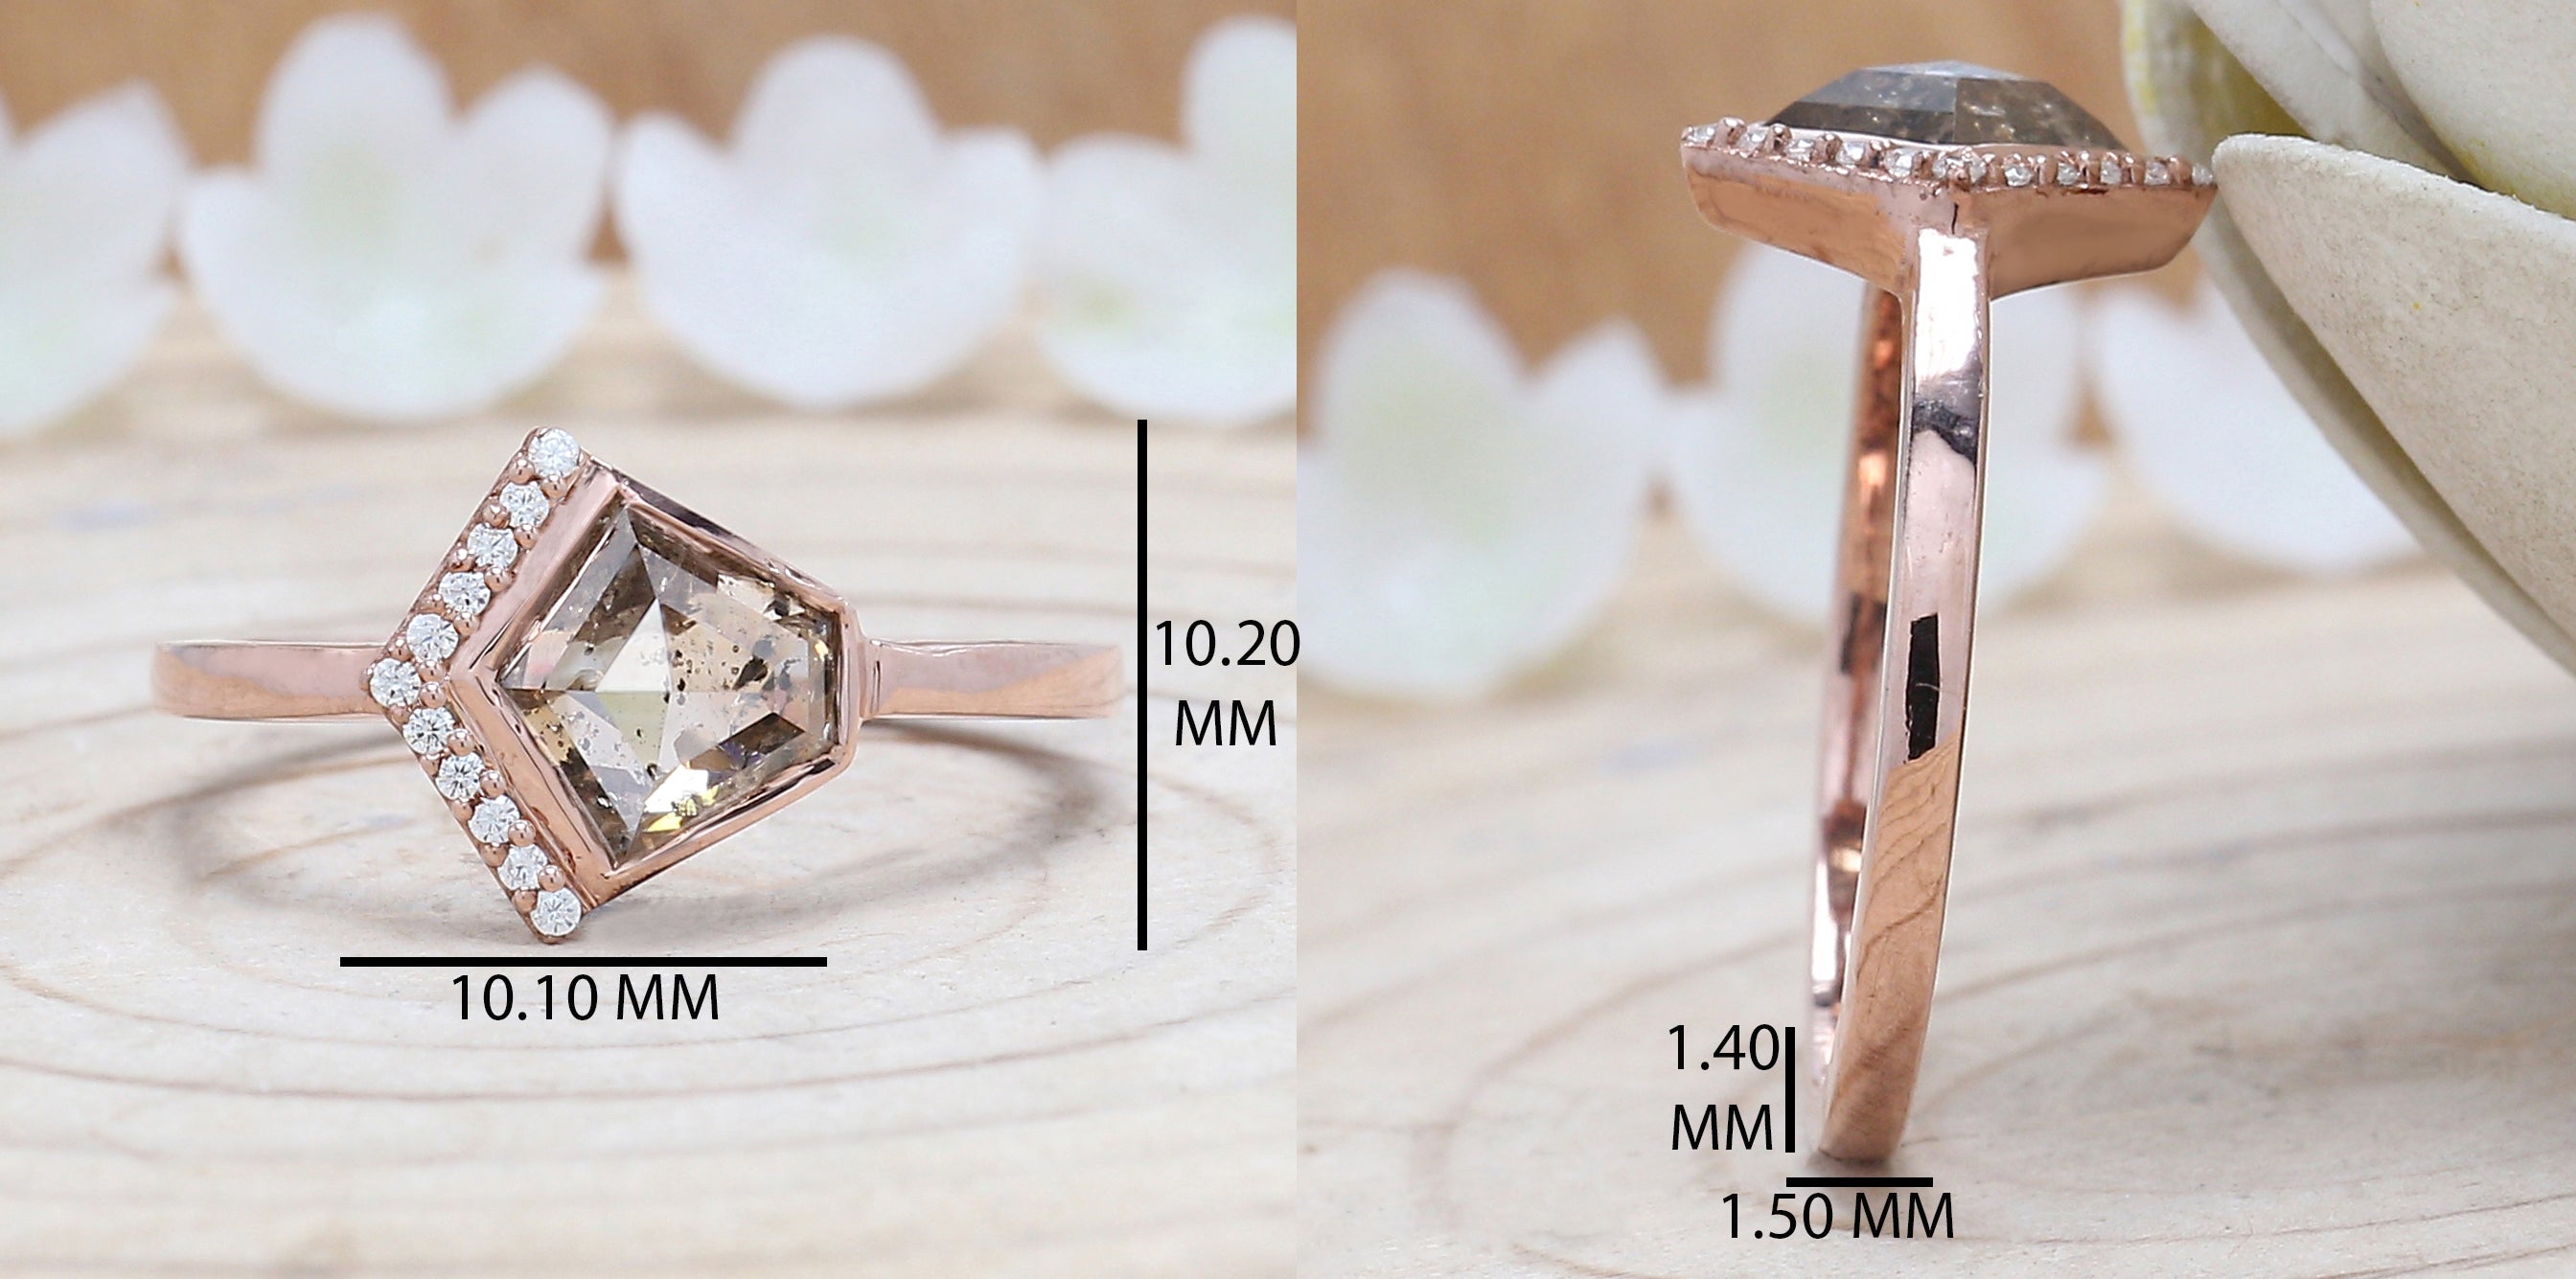 Pentagon Cut Brown Color Diamond Ring 1.12 Ct 7.10 MM Pentagon Shape Diamond Ring 14K Rose Gold Silver Engagement Ring Gift For Her QL9089